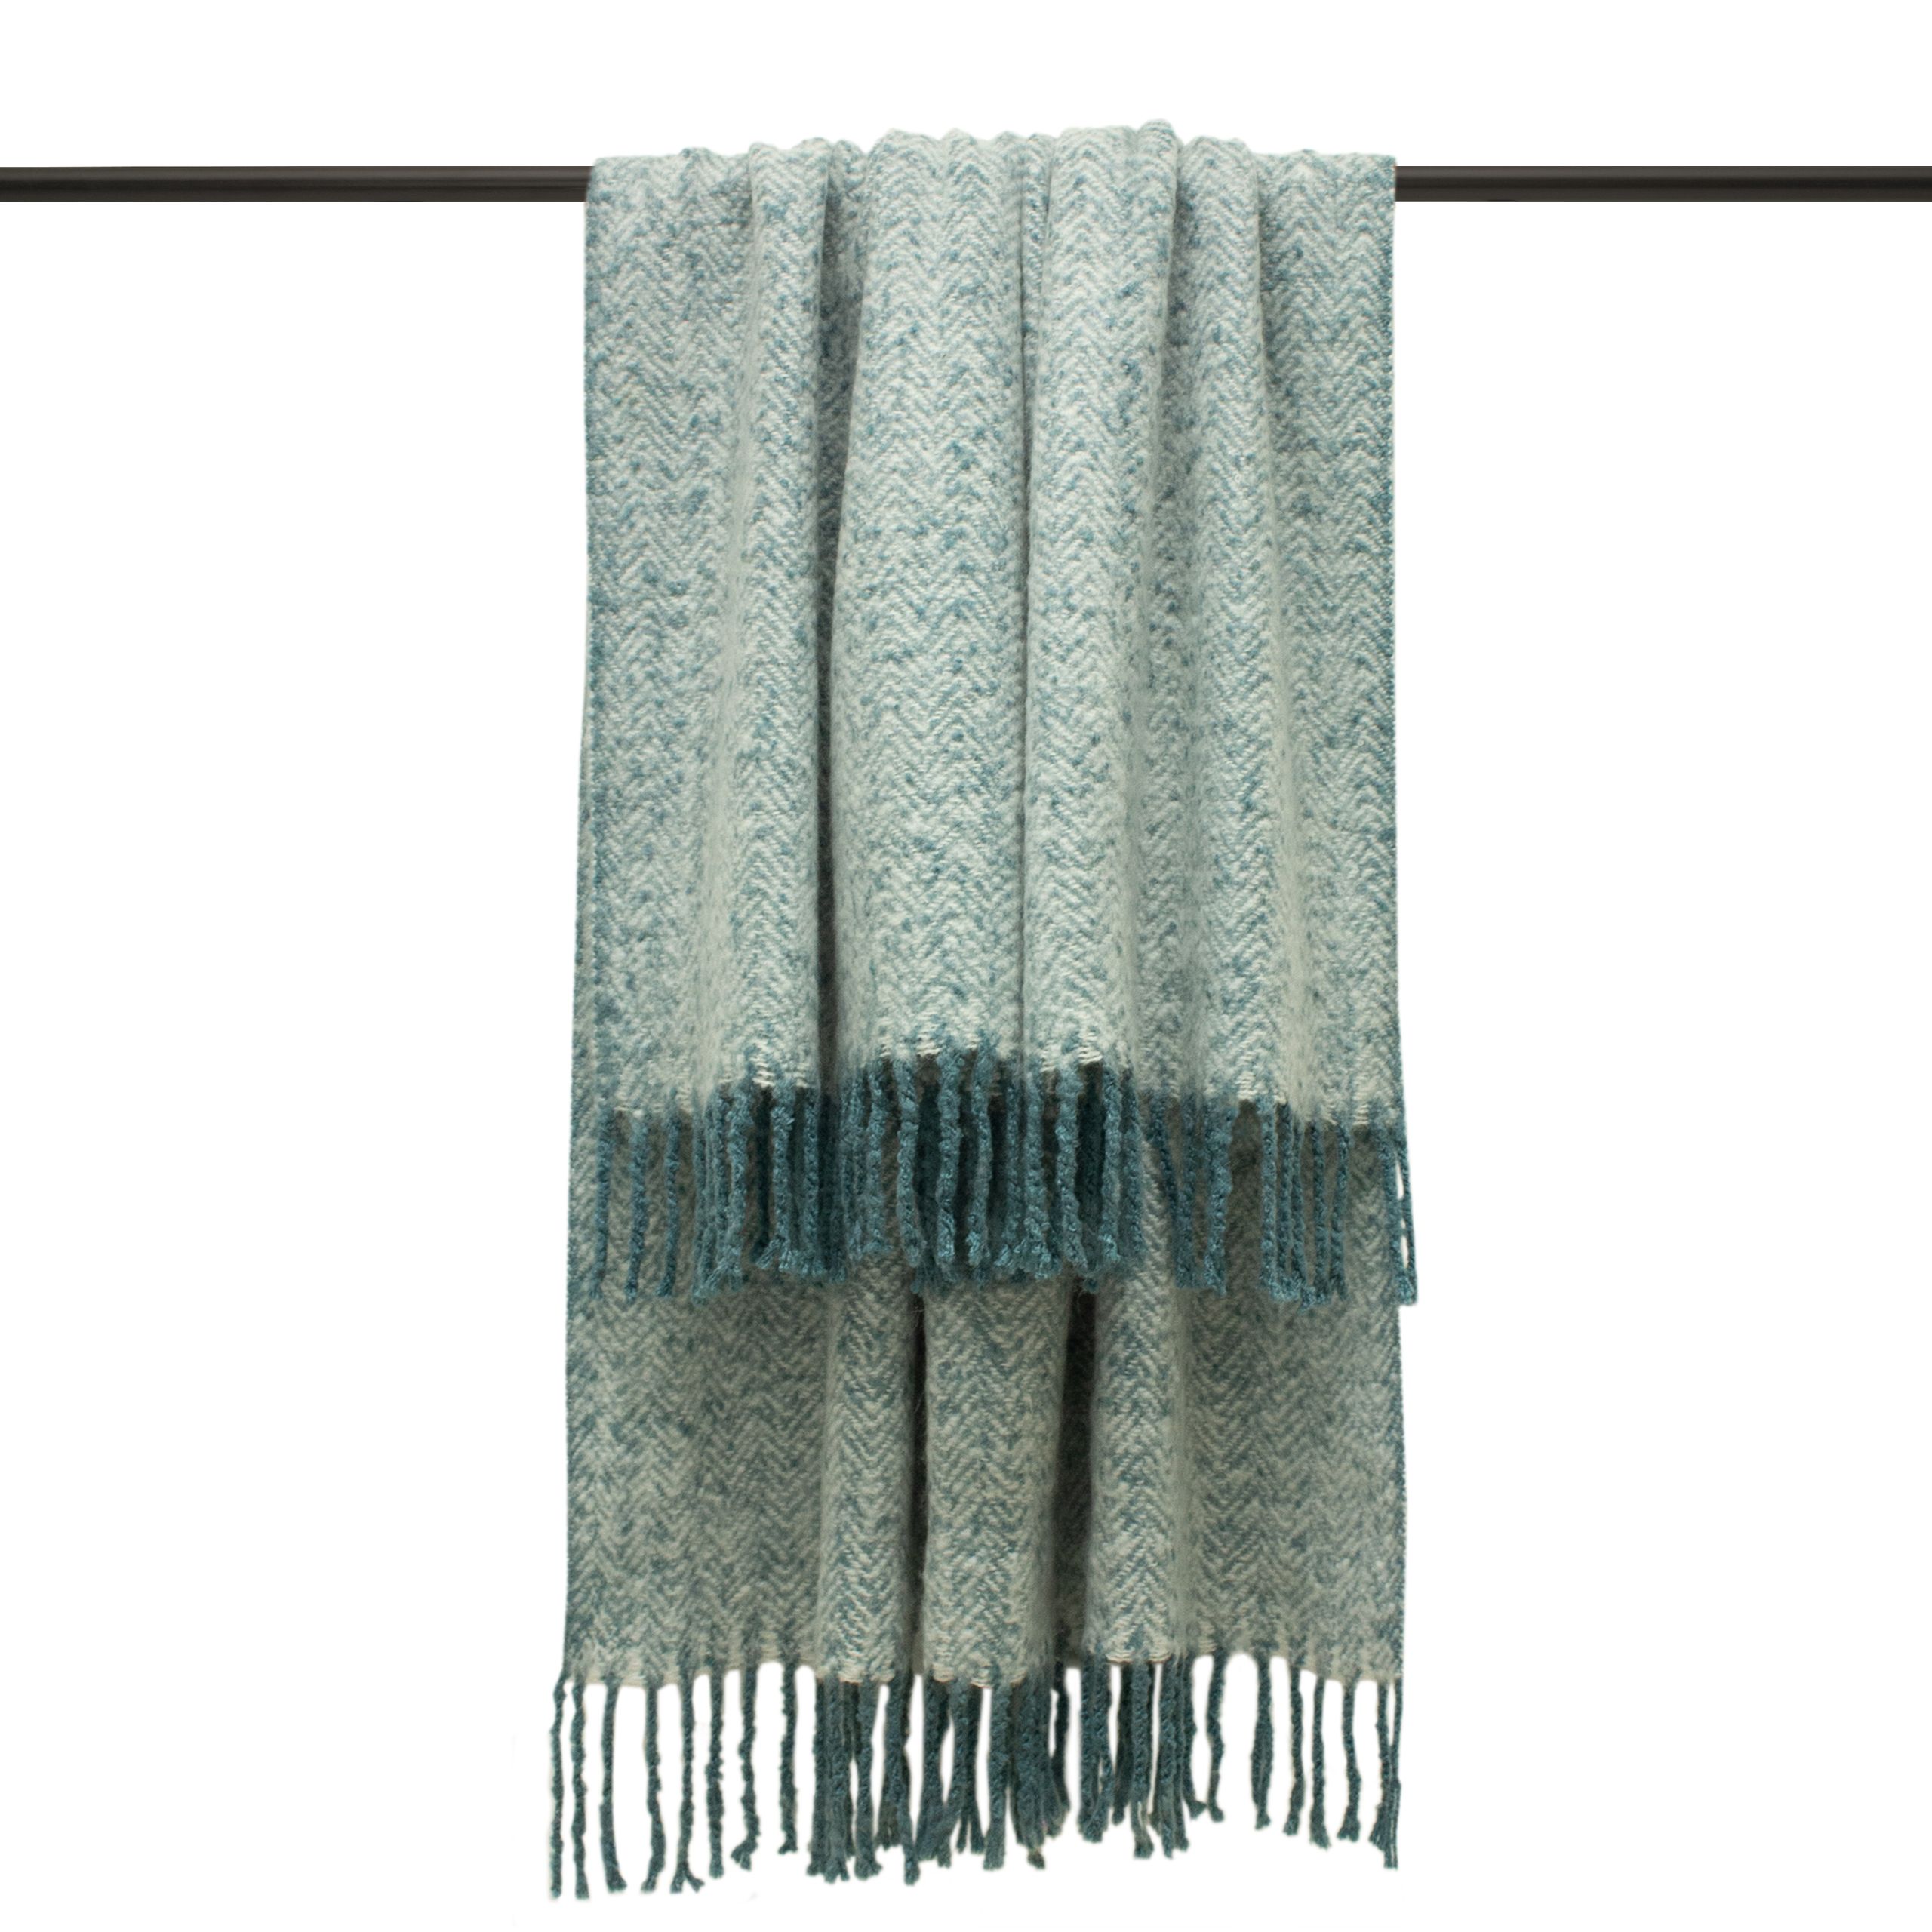 Looking for that all round crowd pleasure that will feature in any room of the house and fit well within many décor styles? This Herringbone print throw is soft with a textured finish. The collection of earth-toned colourways allows the design to be a standout element with its 10cm tassel trim. A real snuggler, this throw is perfect for a homely rustic look.